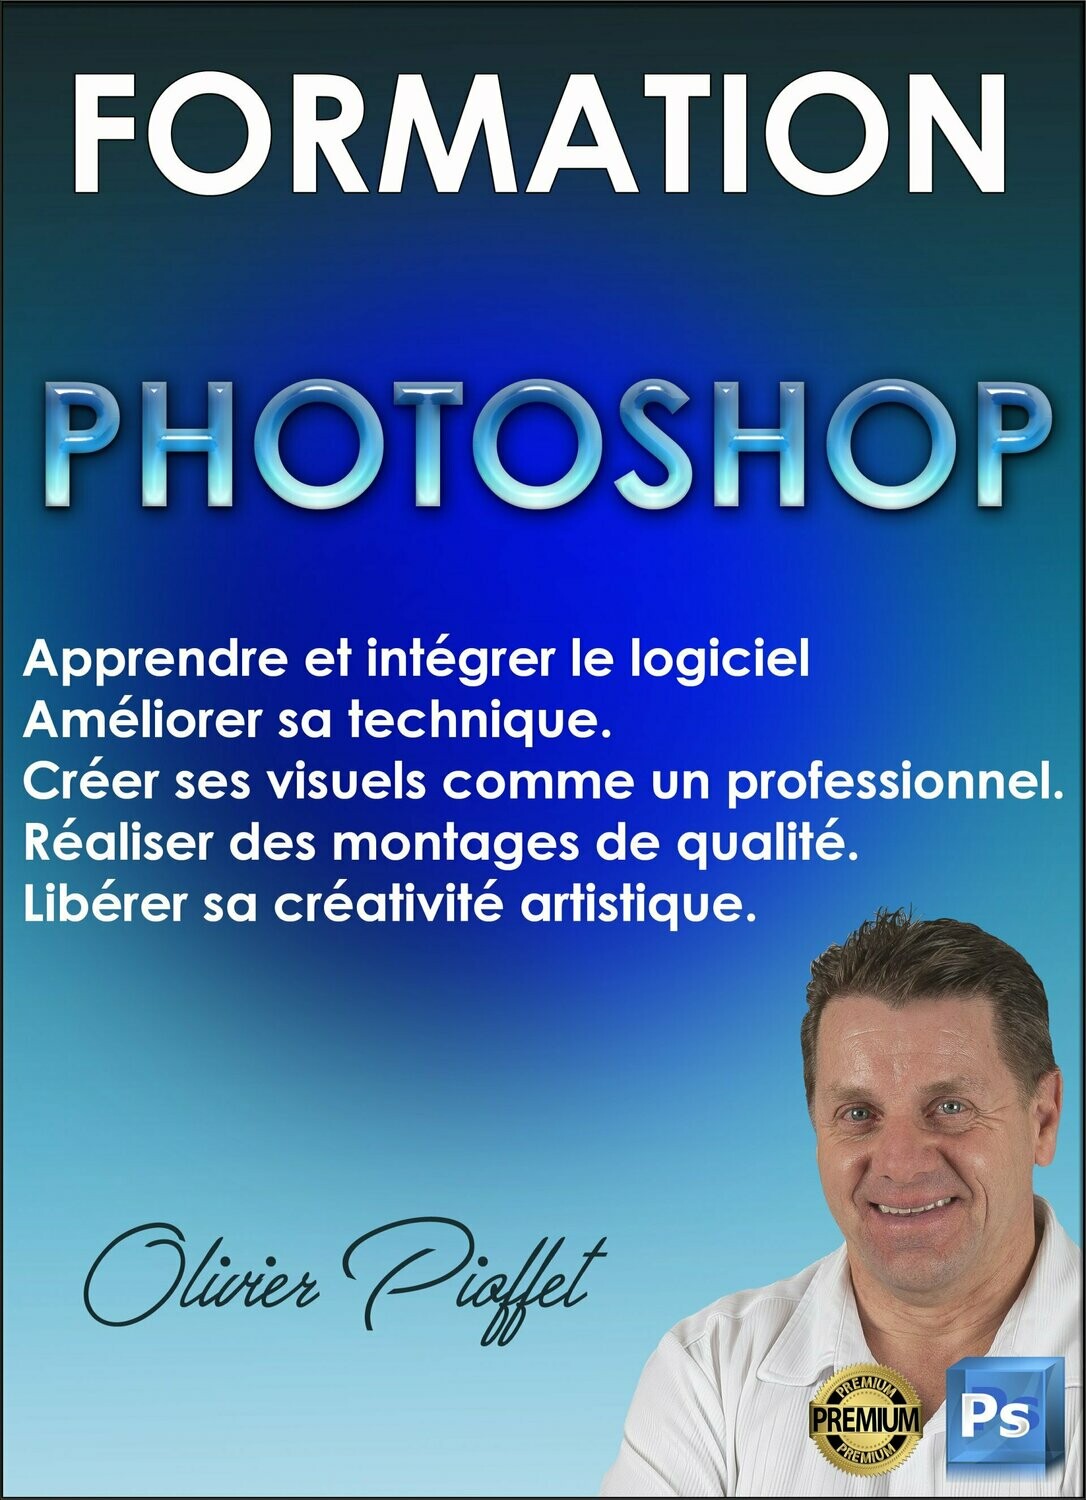 FORMATION PHOTOSHOP FREE 1 h